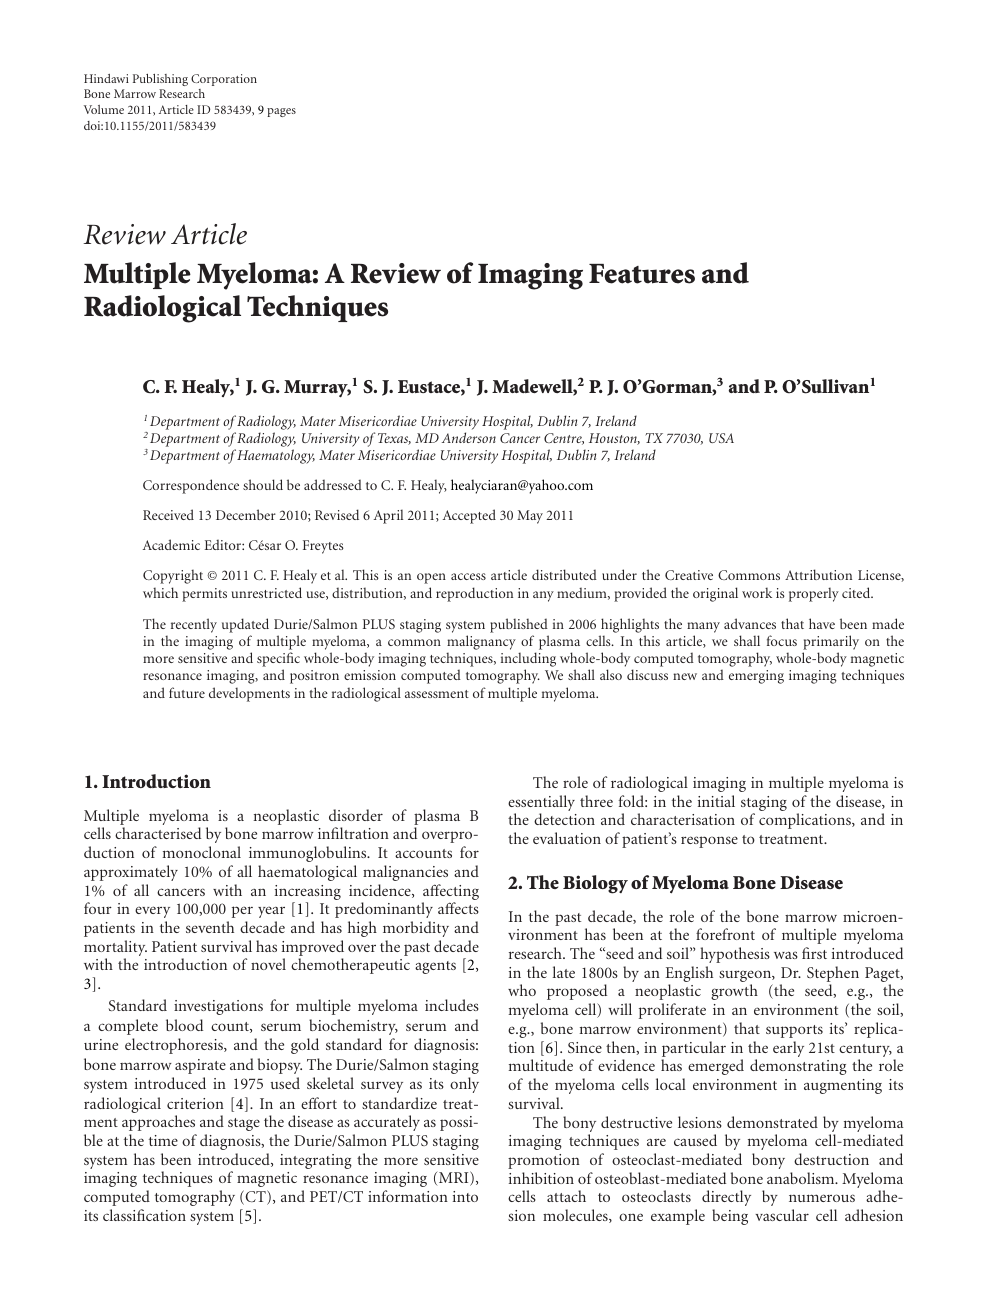 Multiple Myeloma A Review Of Imaging Features And Radiological Techniques Topic Of Research Paper In Clinical Medicine Download Scholarly Article Pdf And Read For Free On Cyberleninka Open Science Hub